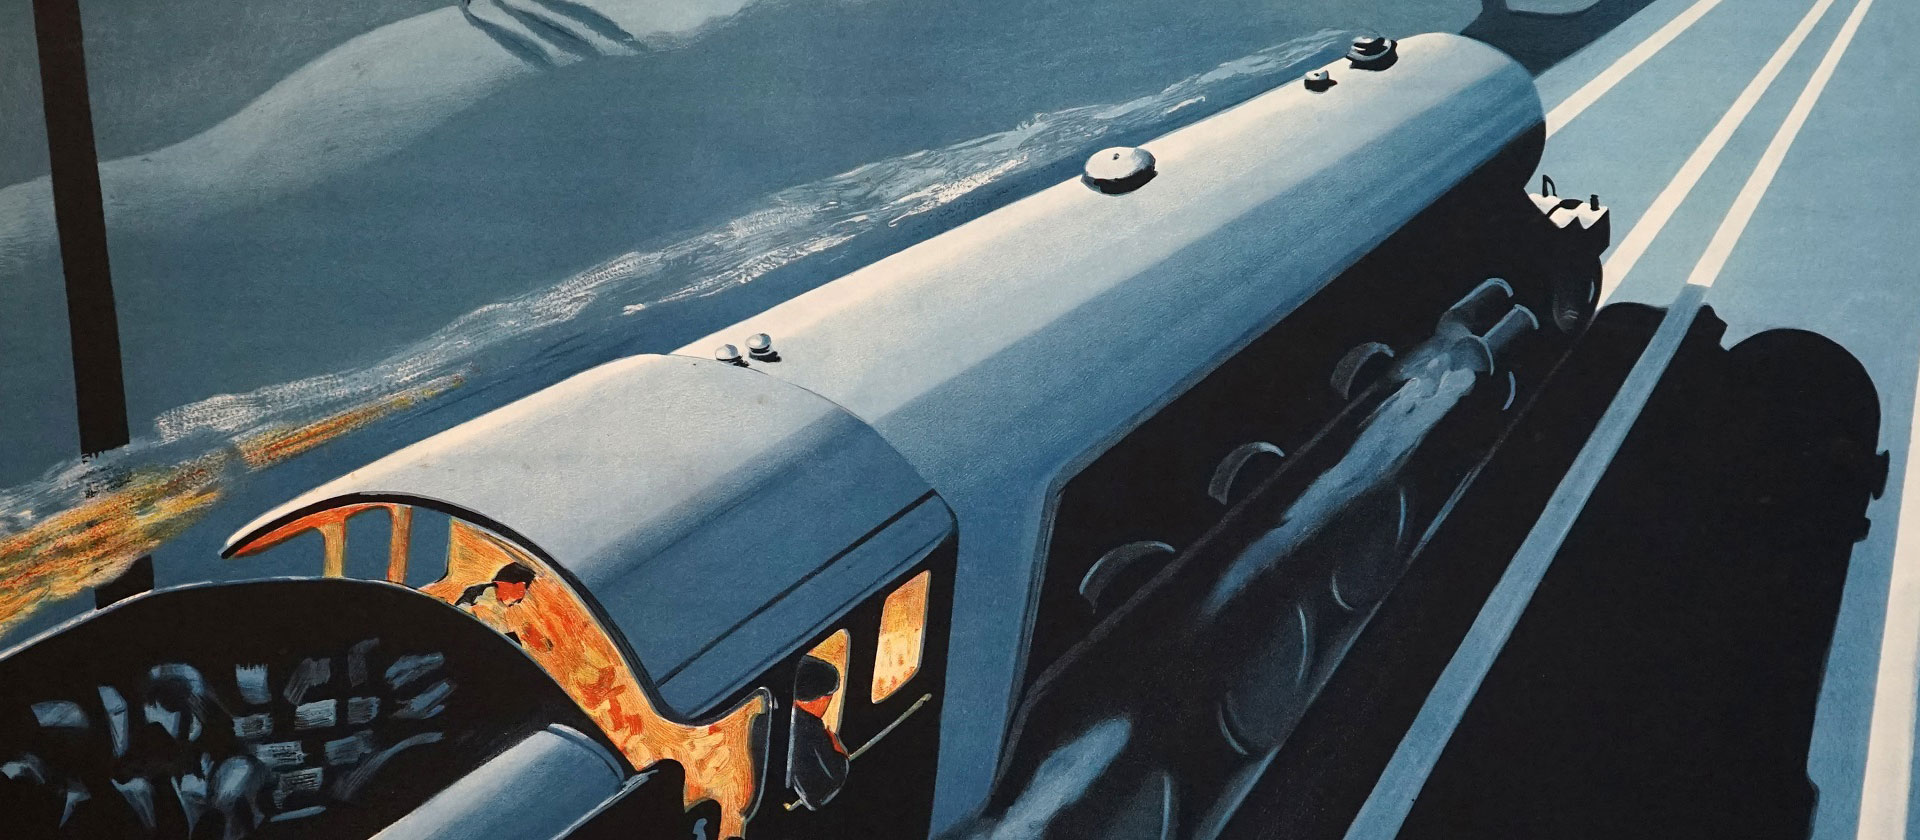 Detail from Robert Bartlett's famous "The Night Scotsman" poster. The poster was one of a series commissioned by LNER to promote both daytime and overnight trains from London to Scotland.